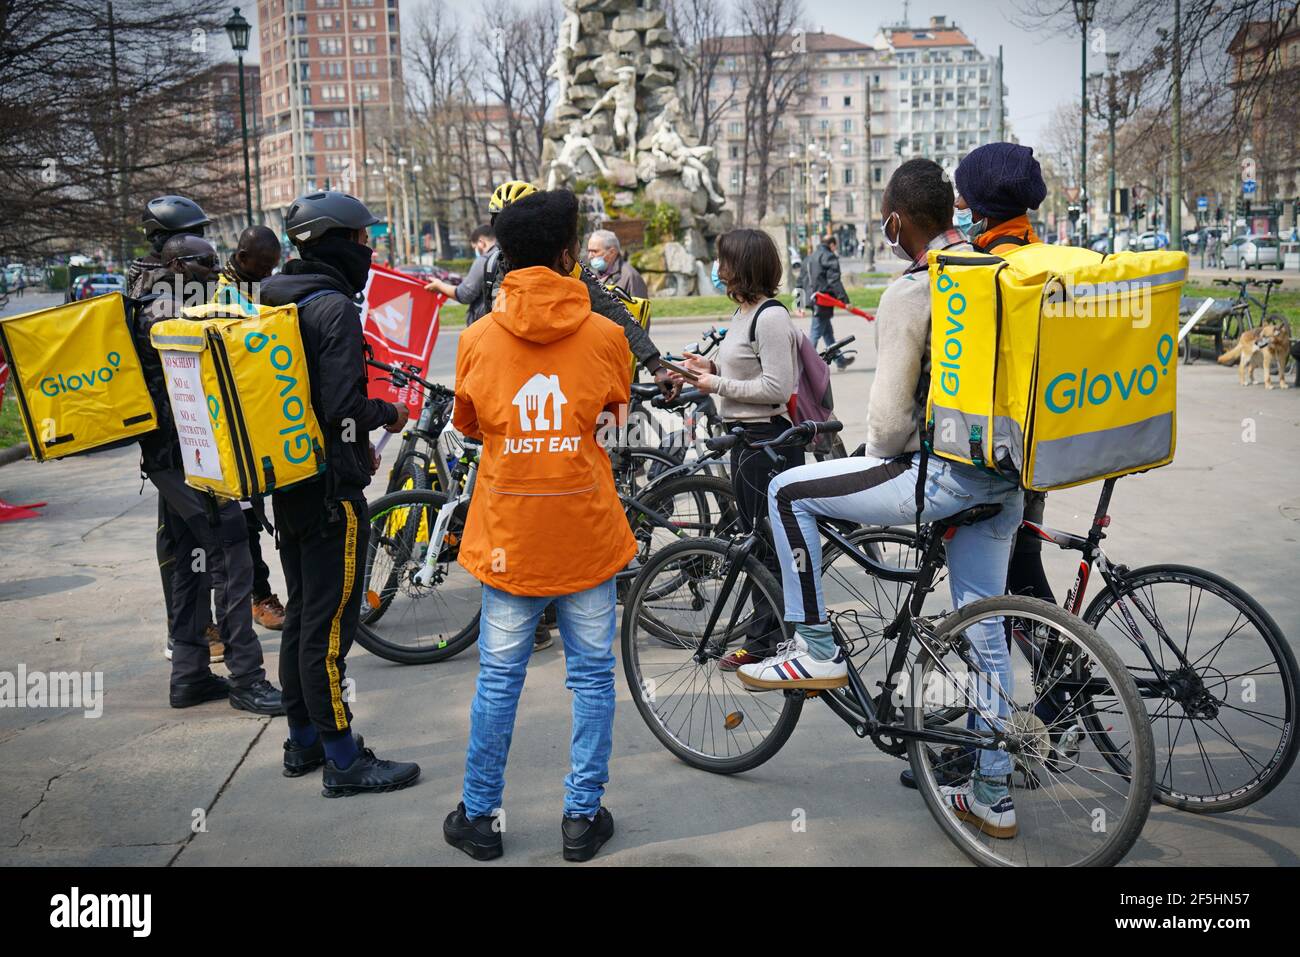 Bicycle food delivery riders protest against working conditions. Turin, Italy - March 2021 Stock Photo